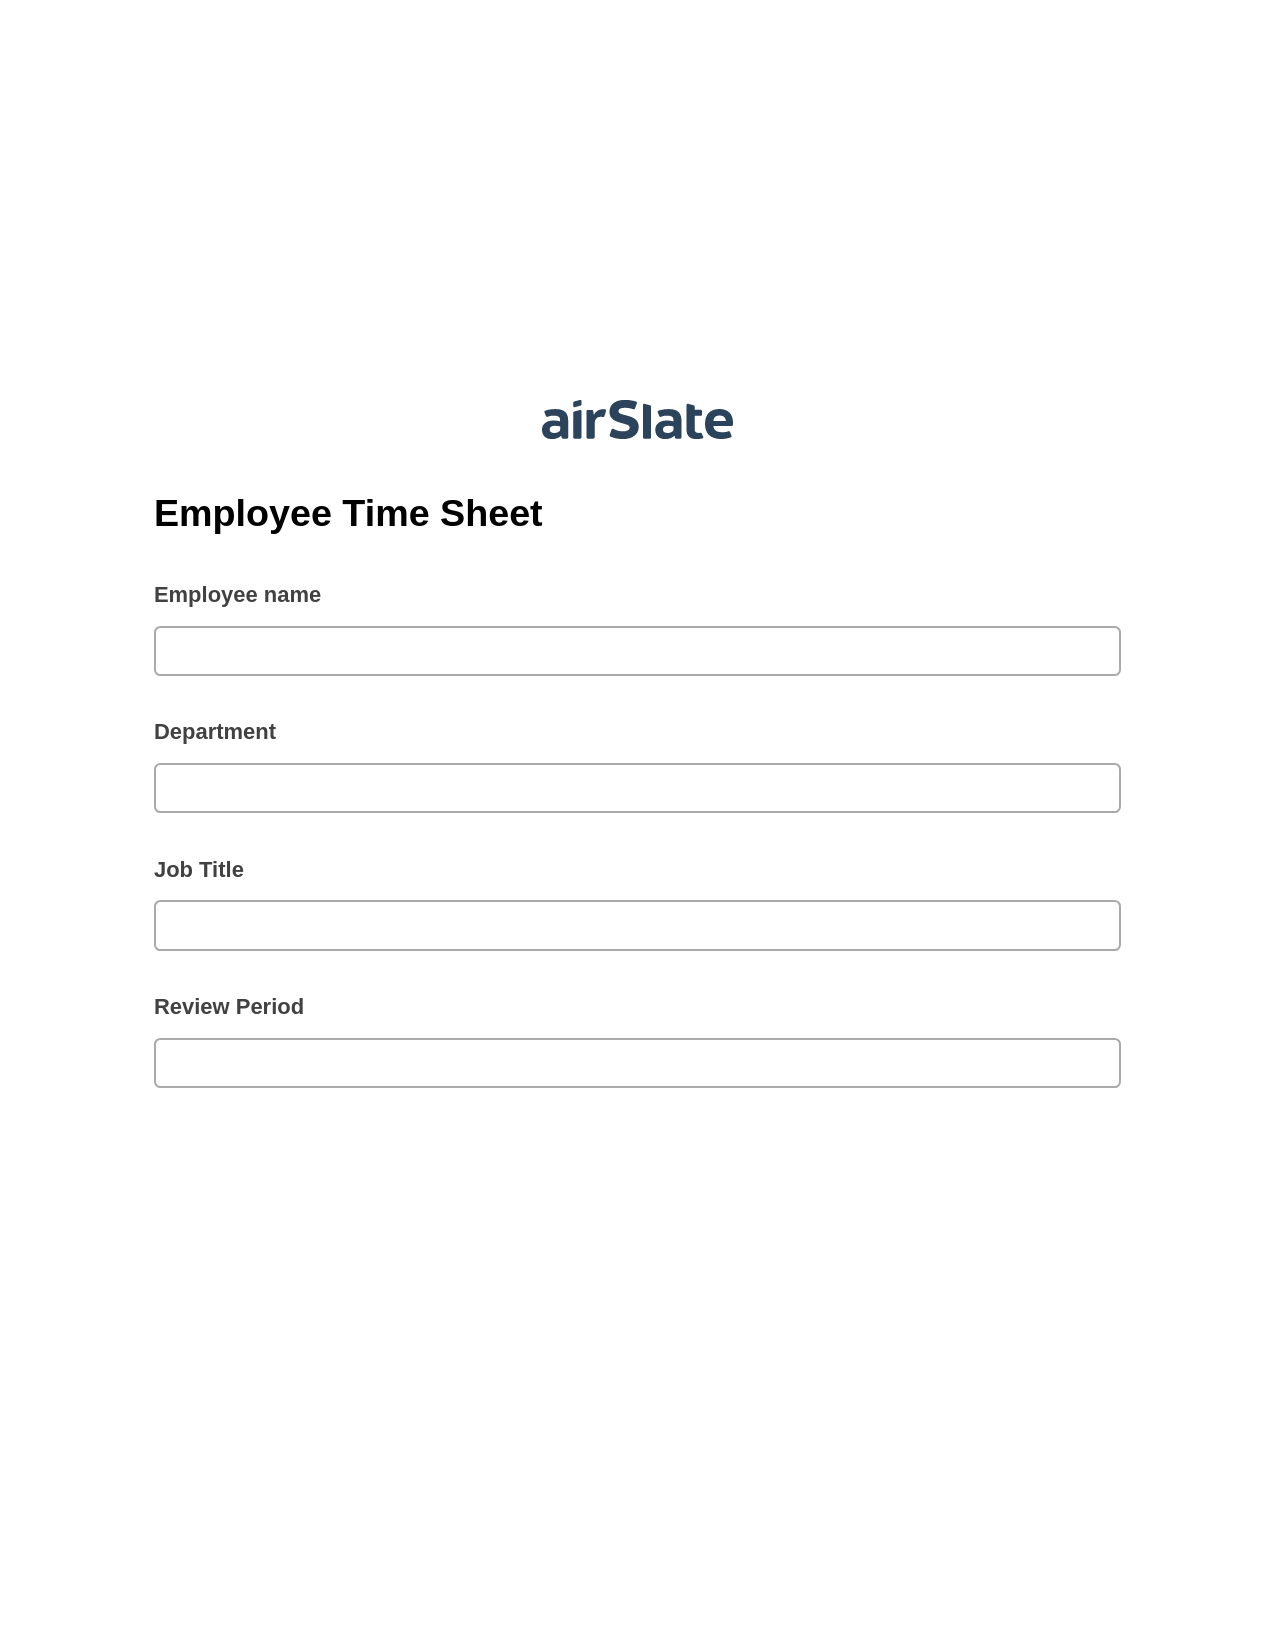 Employee Time Sheet Pre-fill from MS Dynamics 365 Records, Create slate addon, Archive to Dropbox Bot